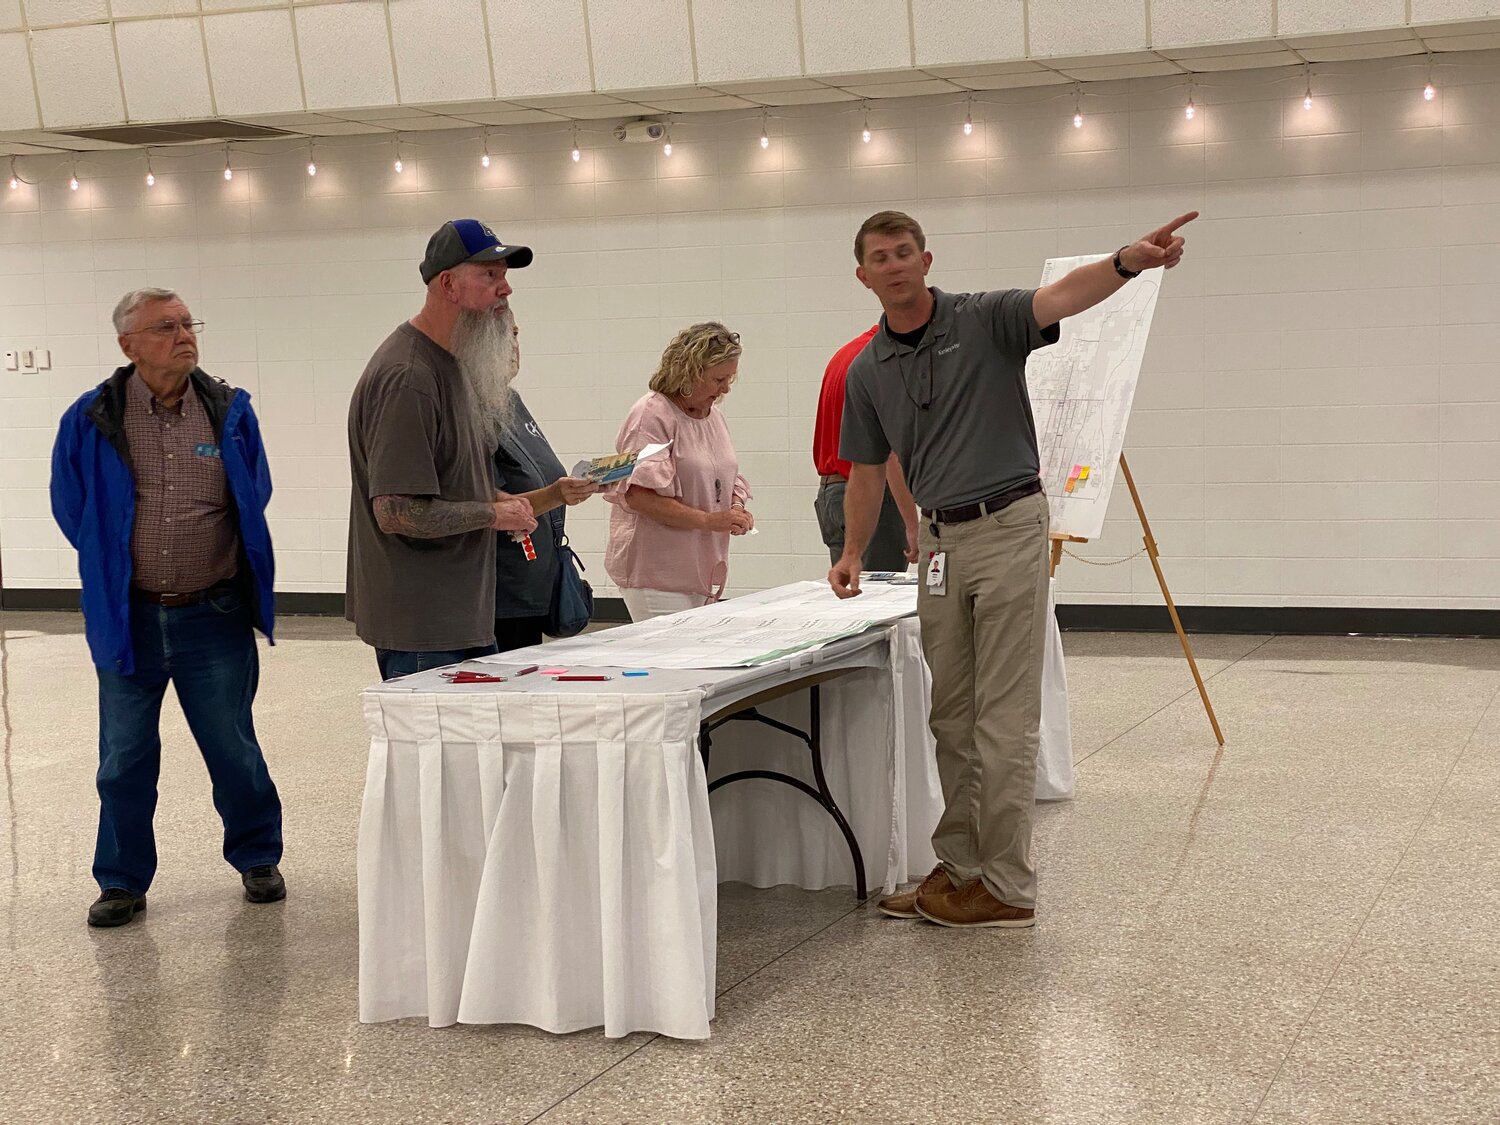 Residents and officials look over proposals for a traffic safety plan being developed for the city of Foley. The plan includes proposals for improvements along highways and major roadways in the city.